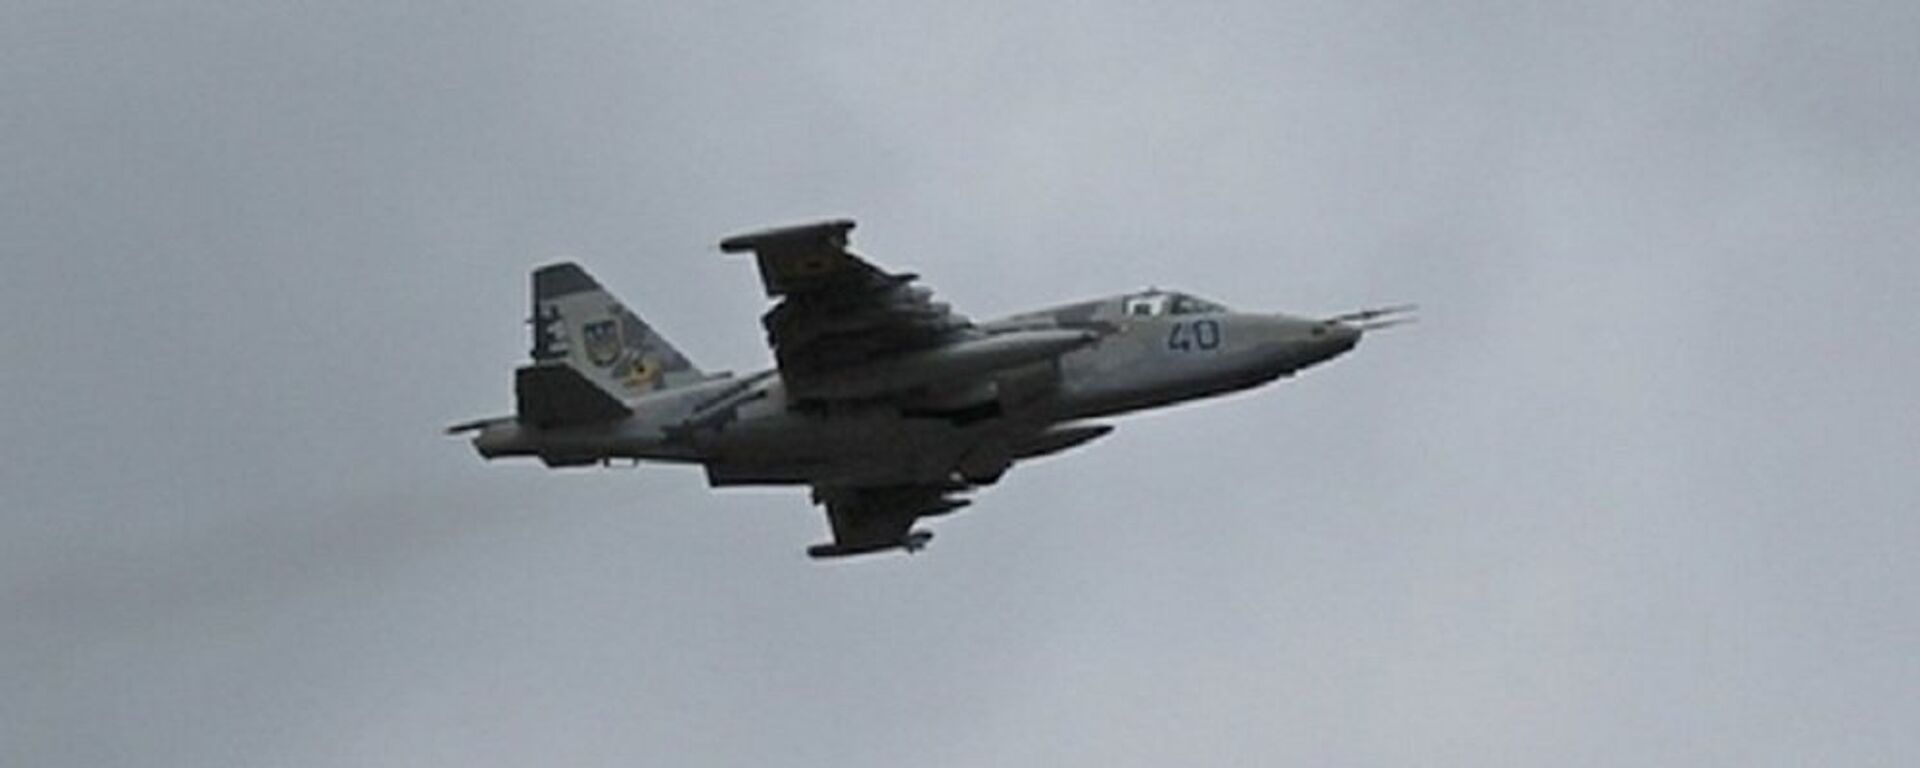 A Ukrainian air force Su-25 combat jet took off from an airbase in eastern Dnipropetrovsk carrying air-to-air missiles and returned without them on the day a Malaysia Airlines plane crashed in eastern Ukraine in July - Sputnik International, 1920, 30.04.2022